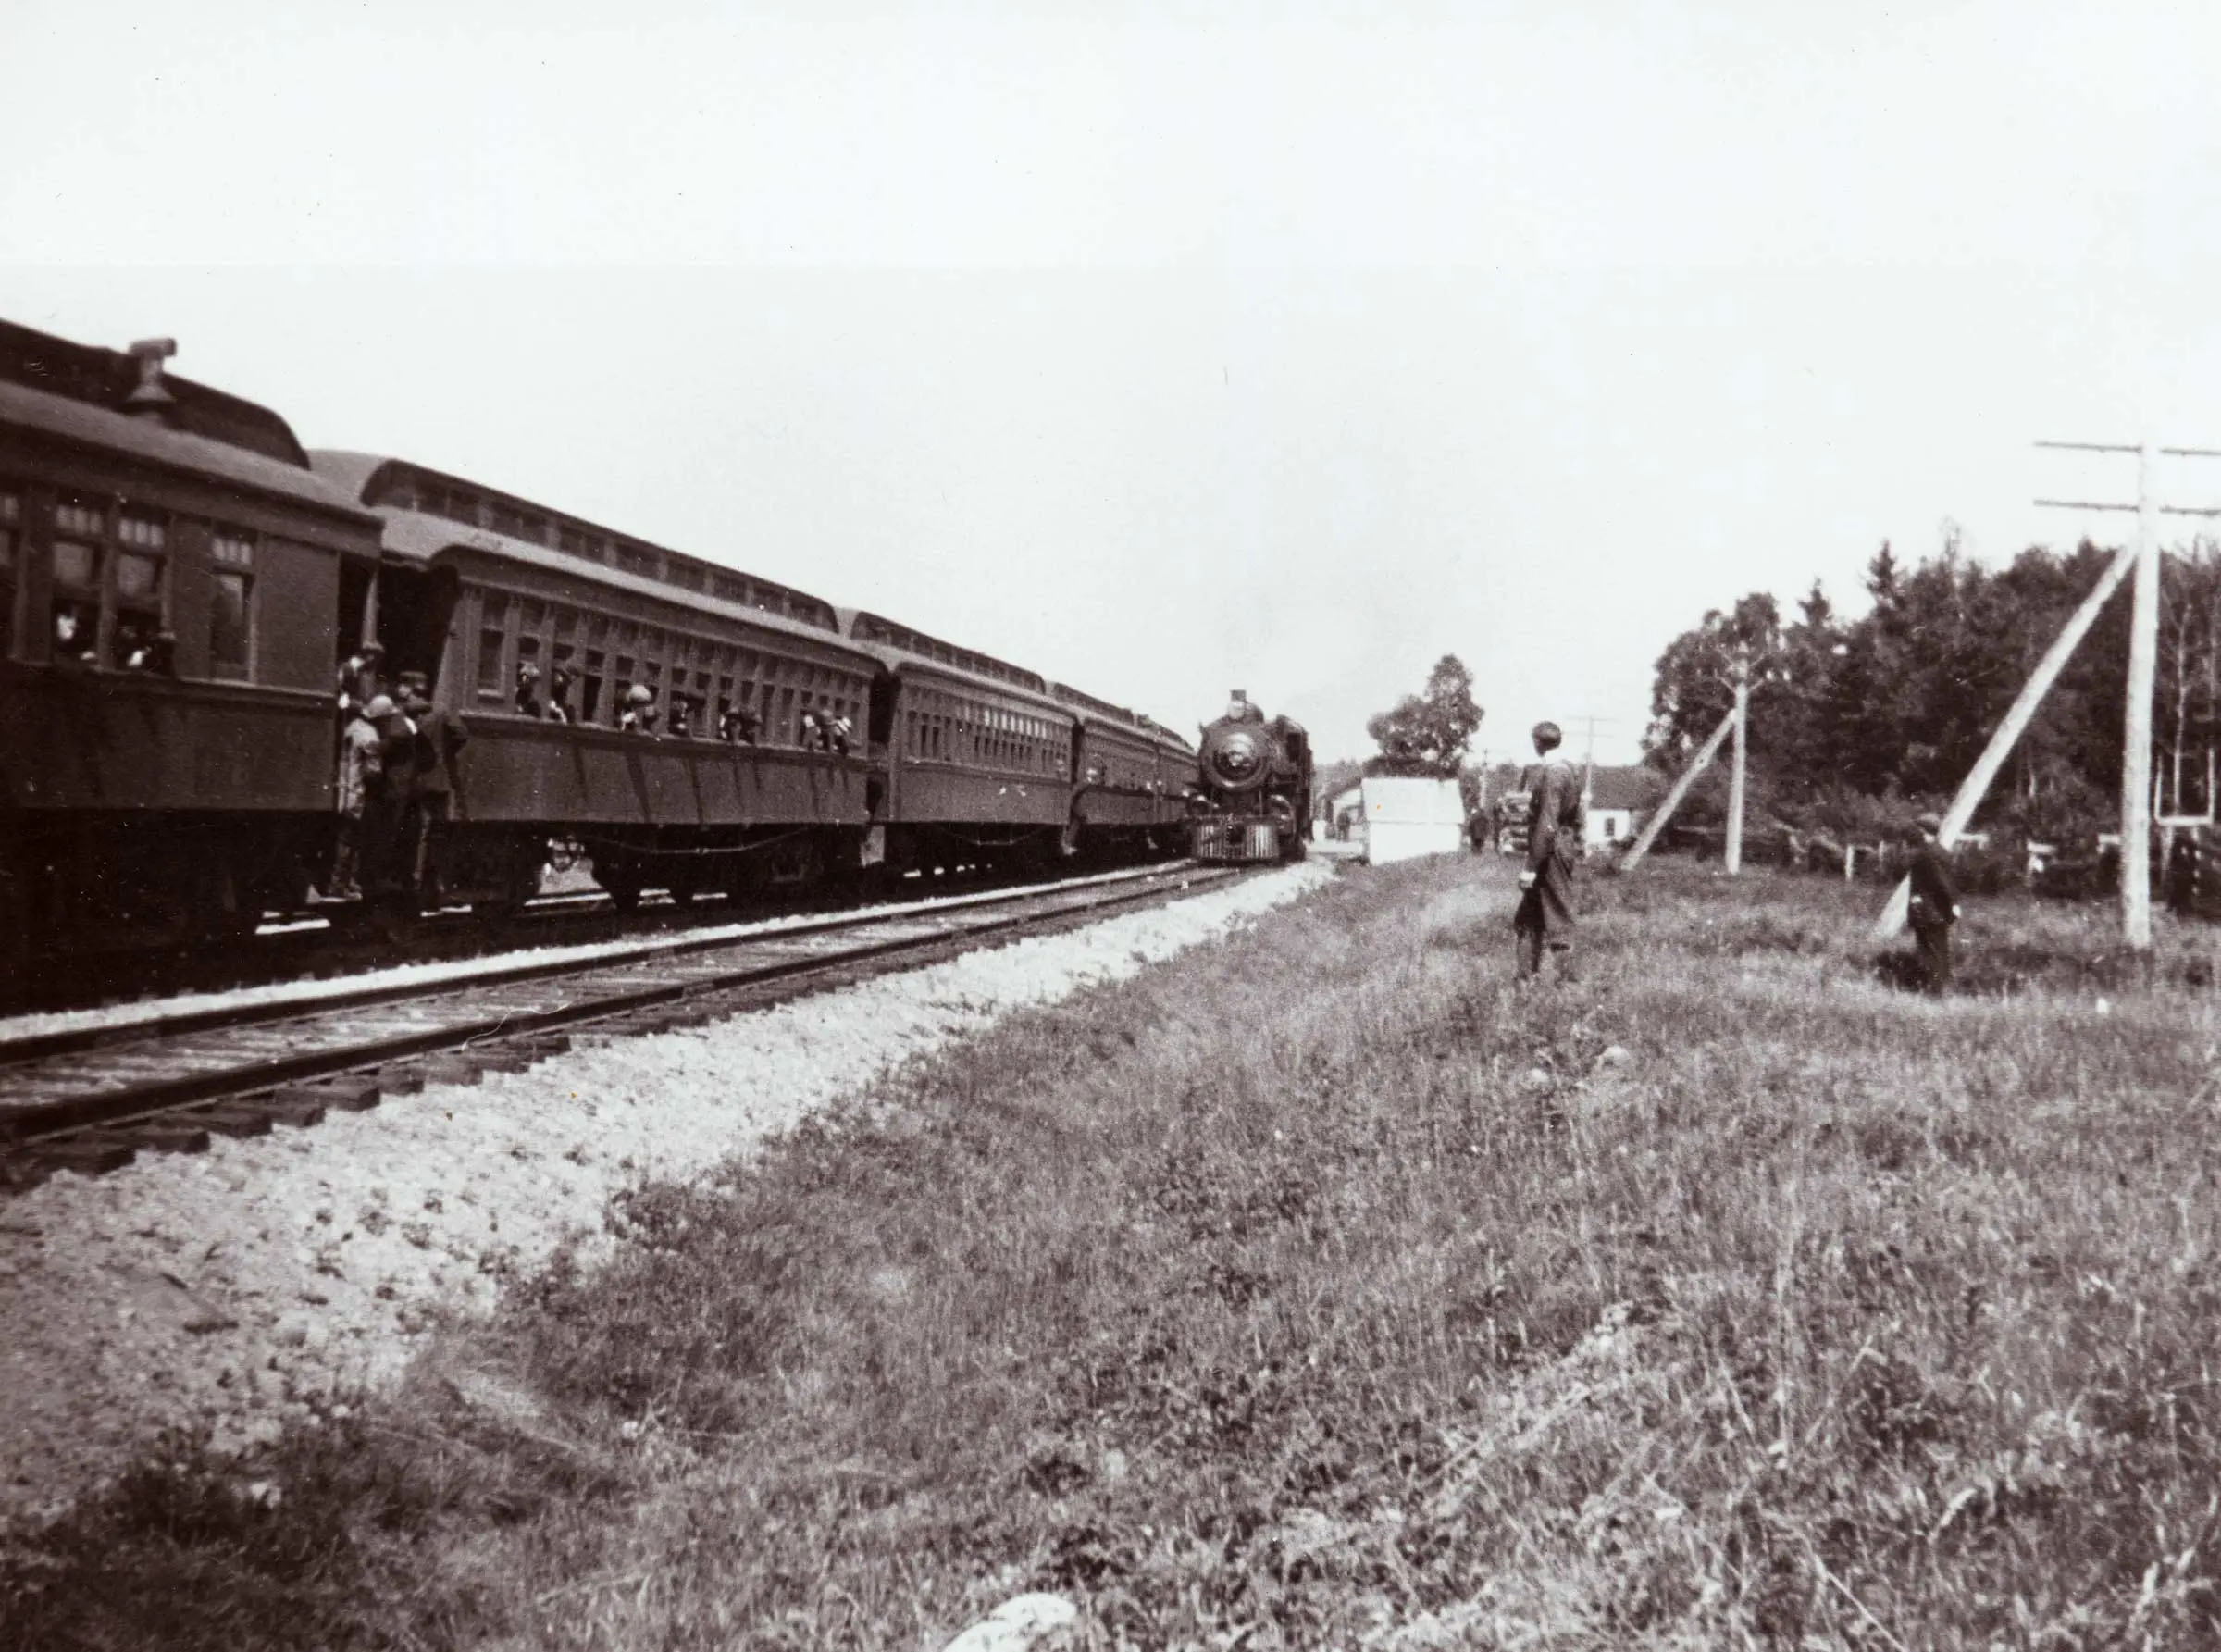 A long train on a curving track with some passengers leaning out of the windows.